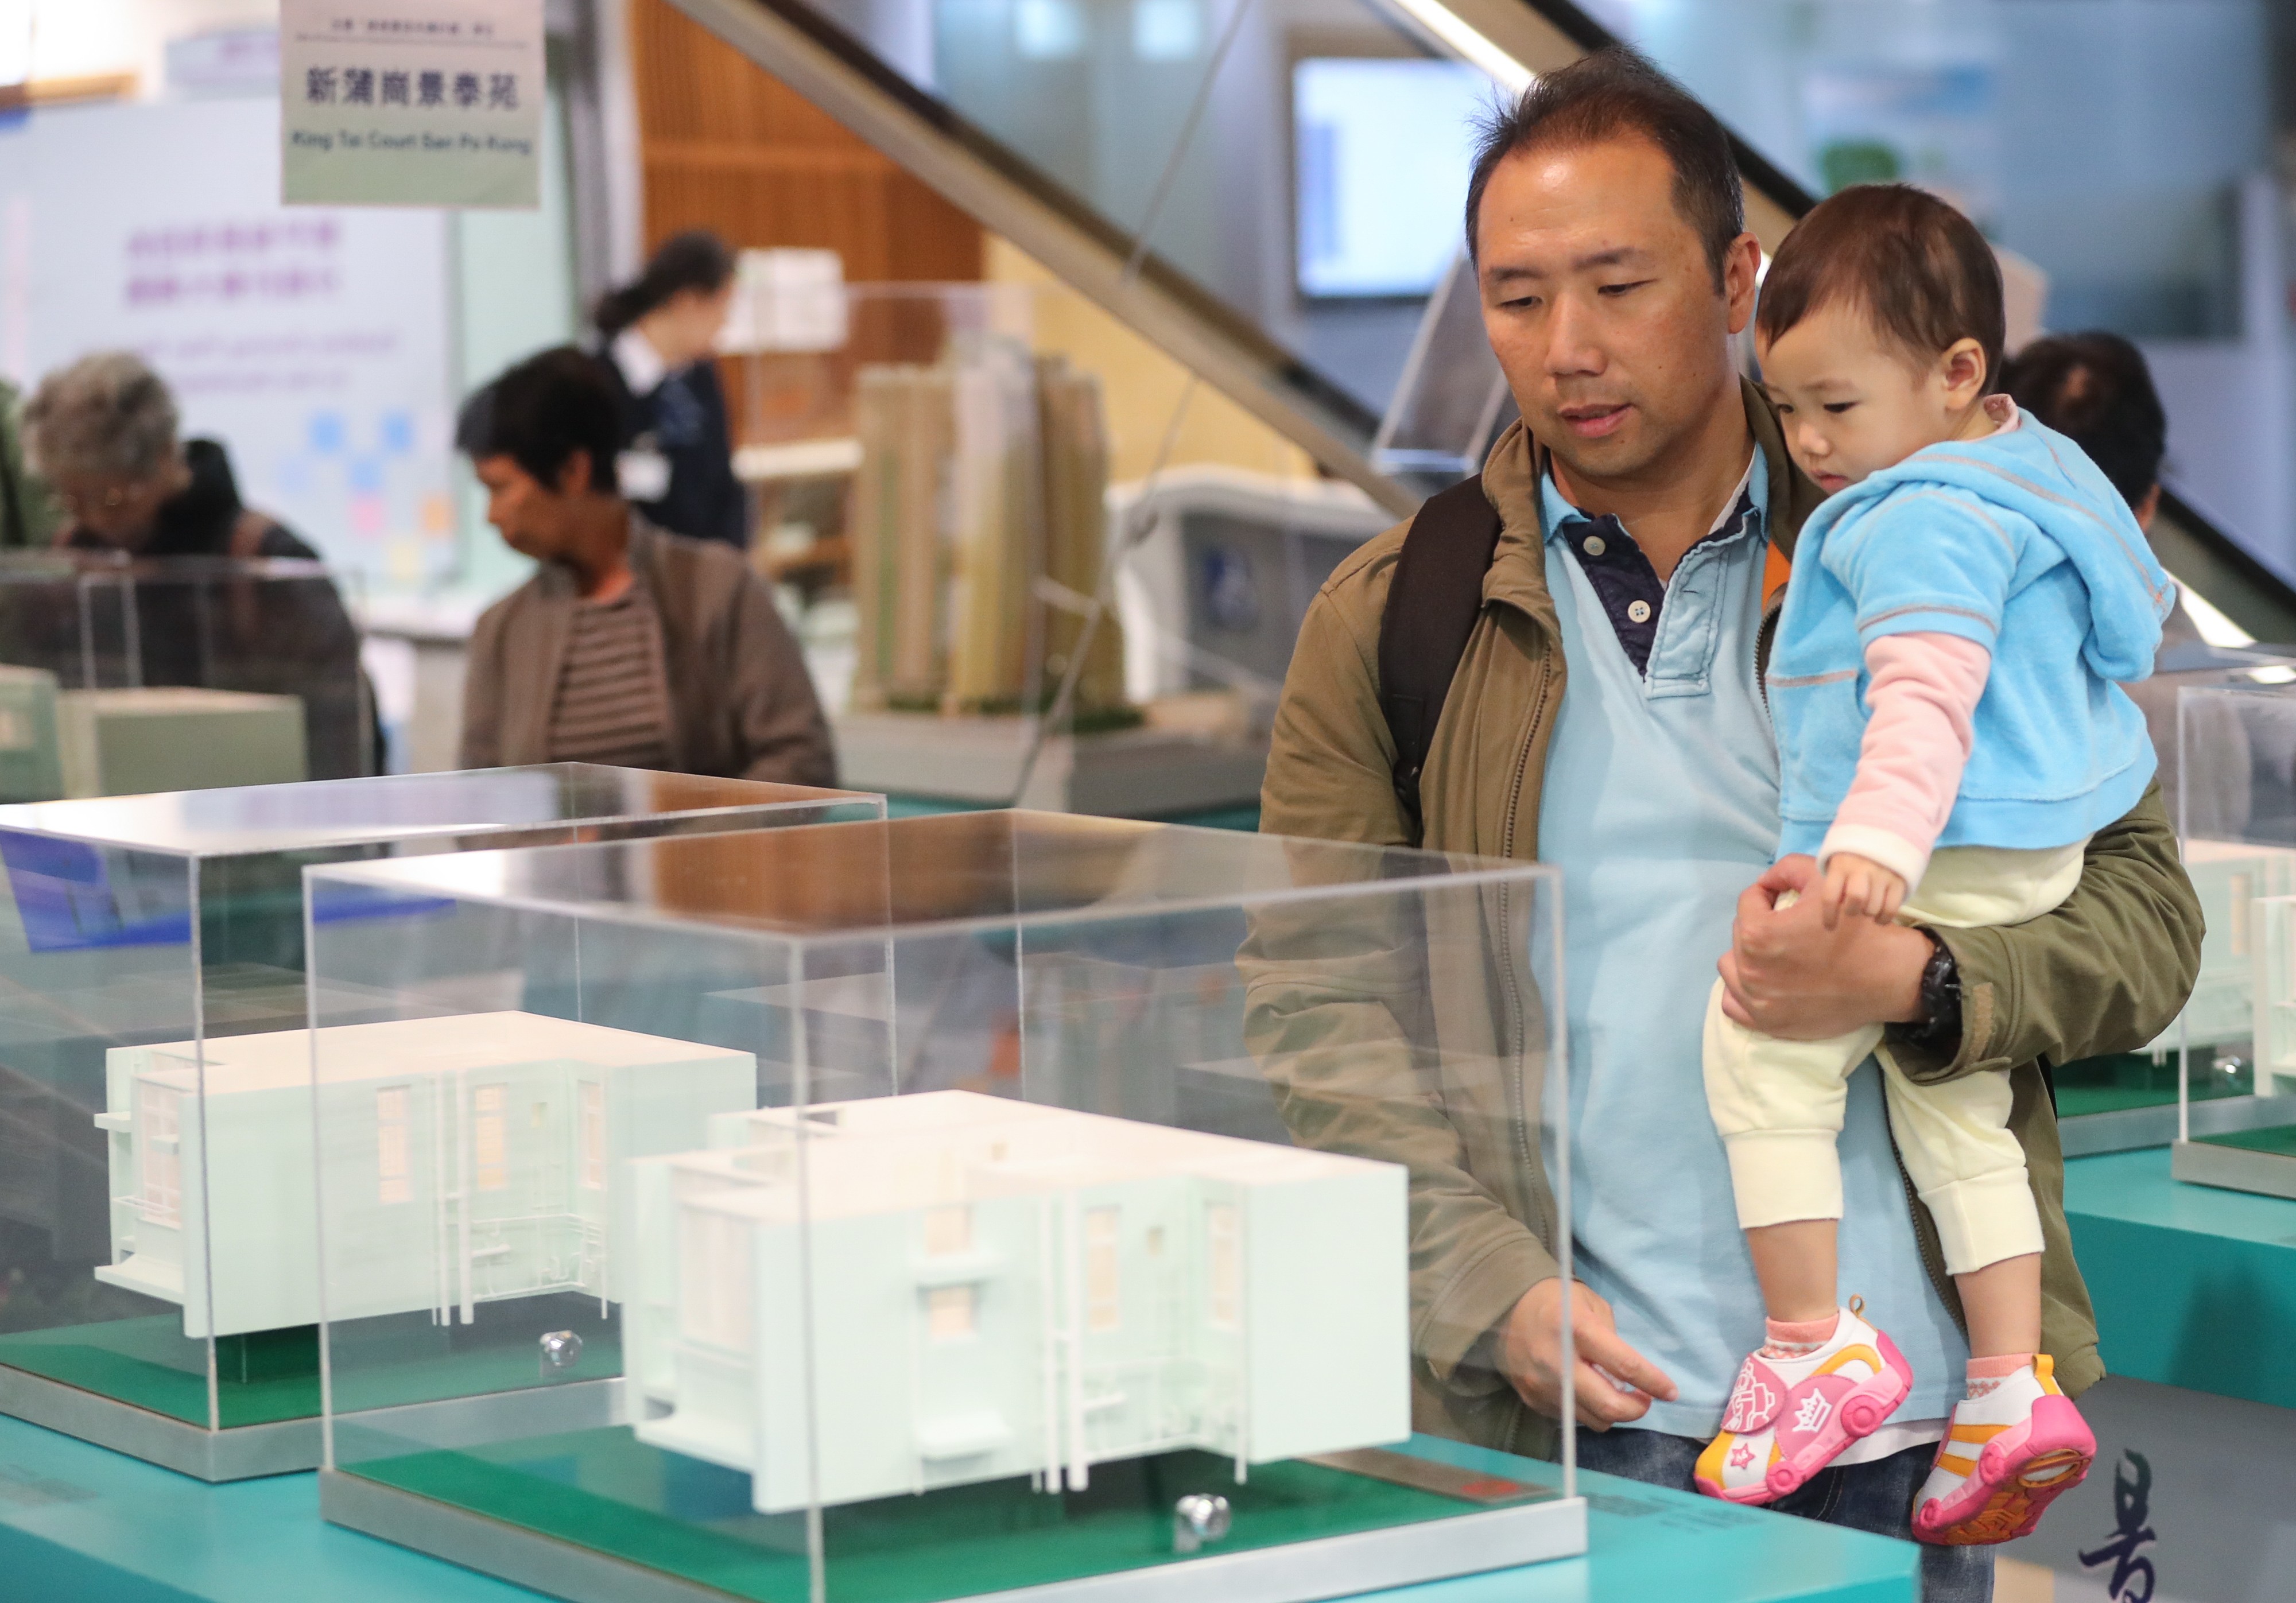 For many young families, owning a home in Hong Kong is an impossible dream. Photo: Edward Wong